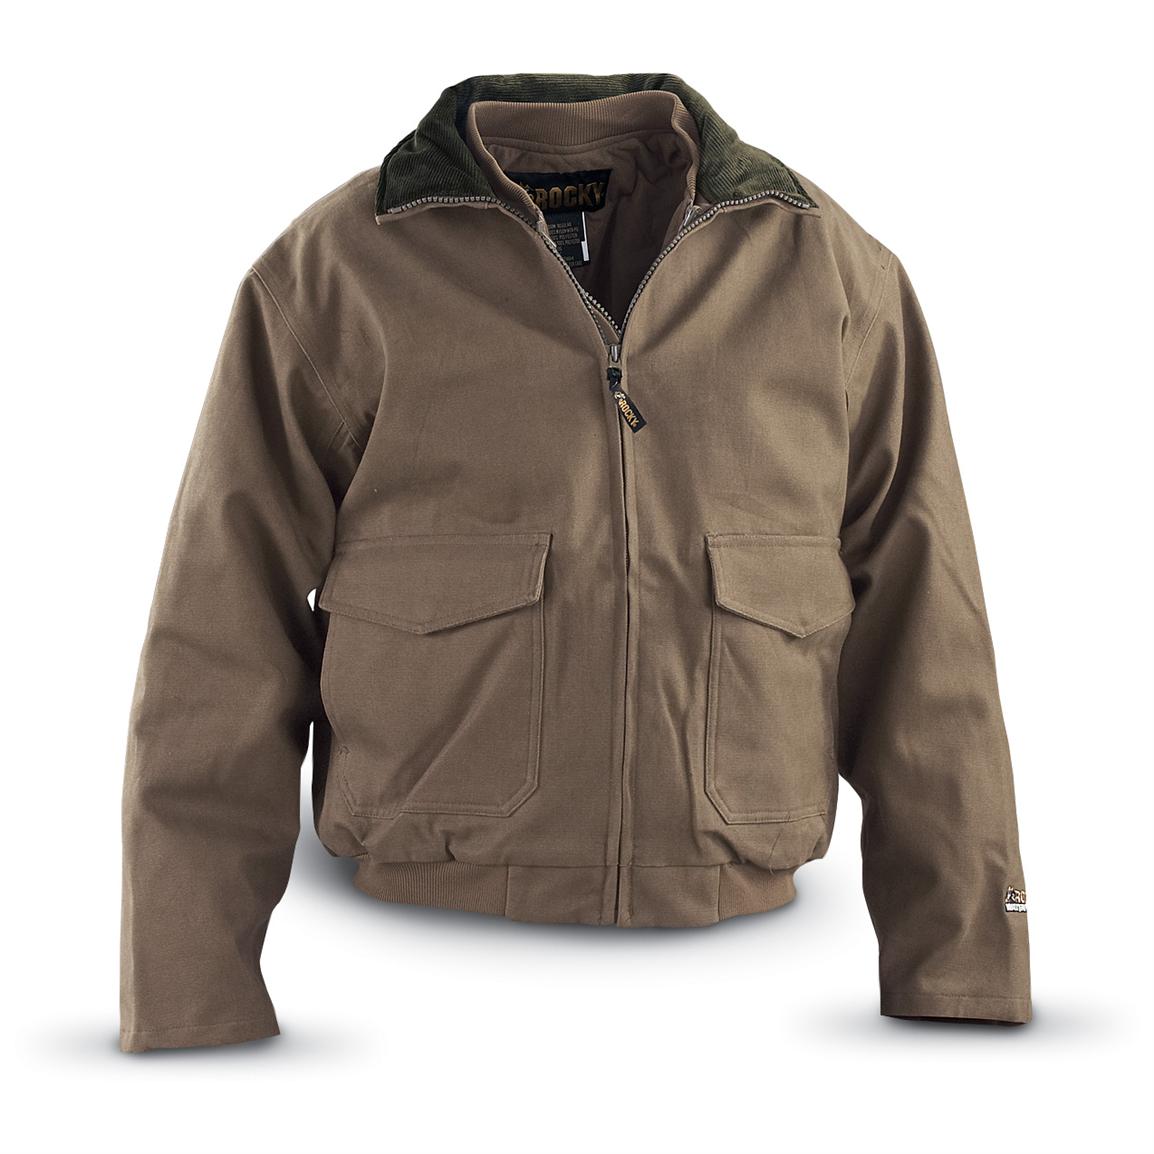 Rocky® WorkSmart Systems Jacket with Zip - out Liner, Smoke Green ...